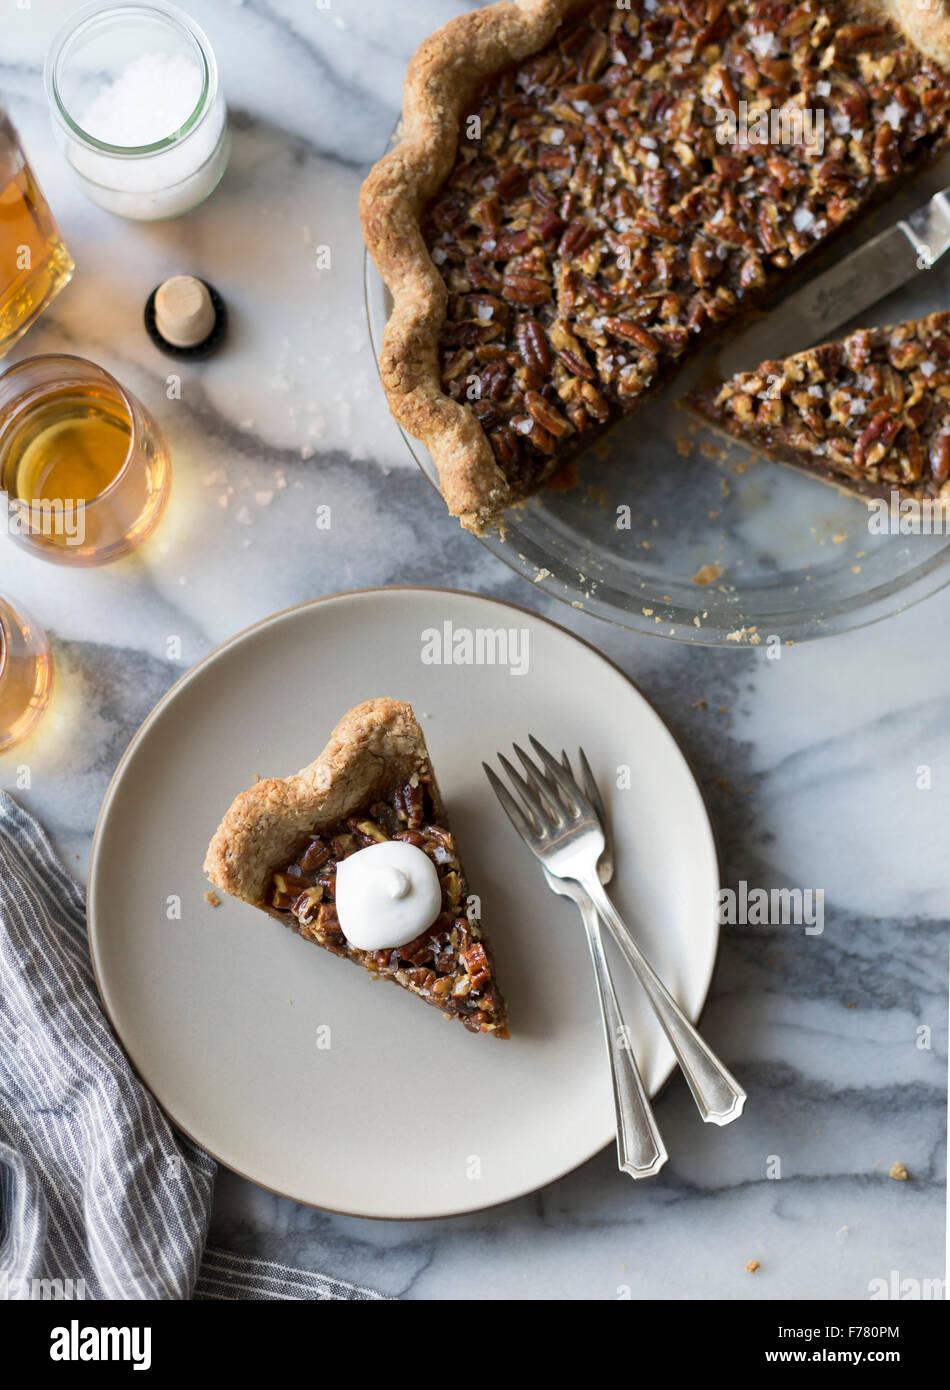 Salty bourbon pecan pie (gluten-free, with sorghum flour and sorghum syrup) Stock Photo